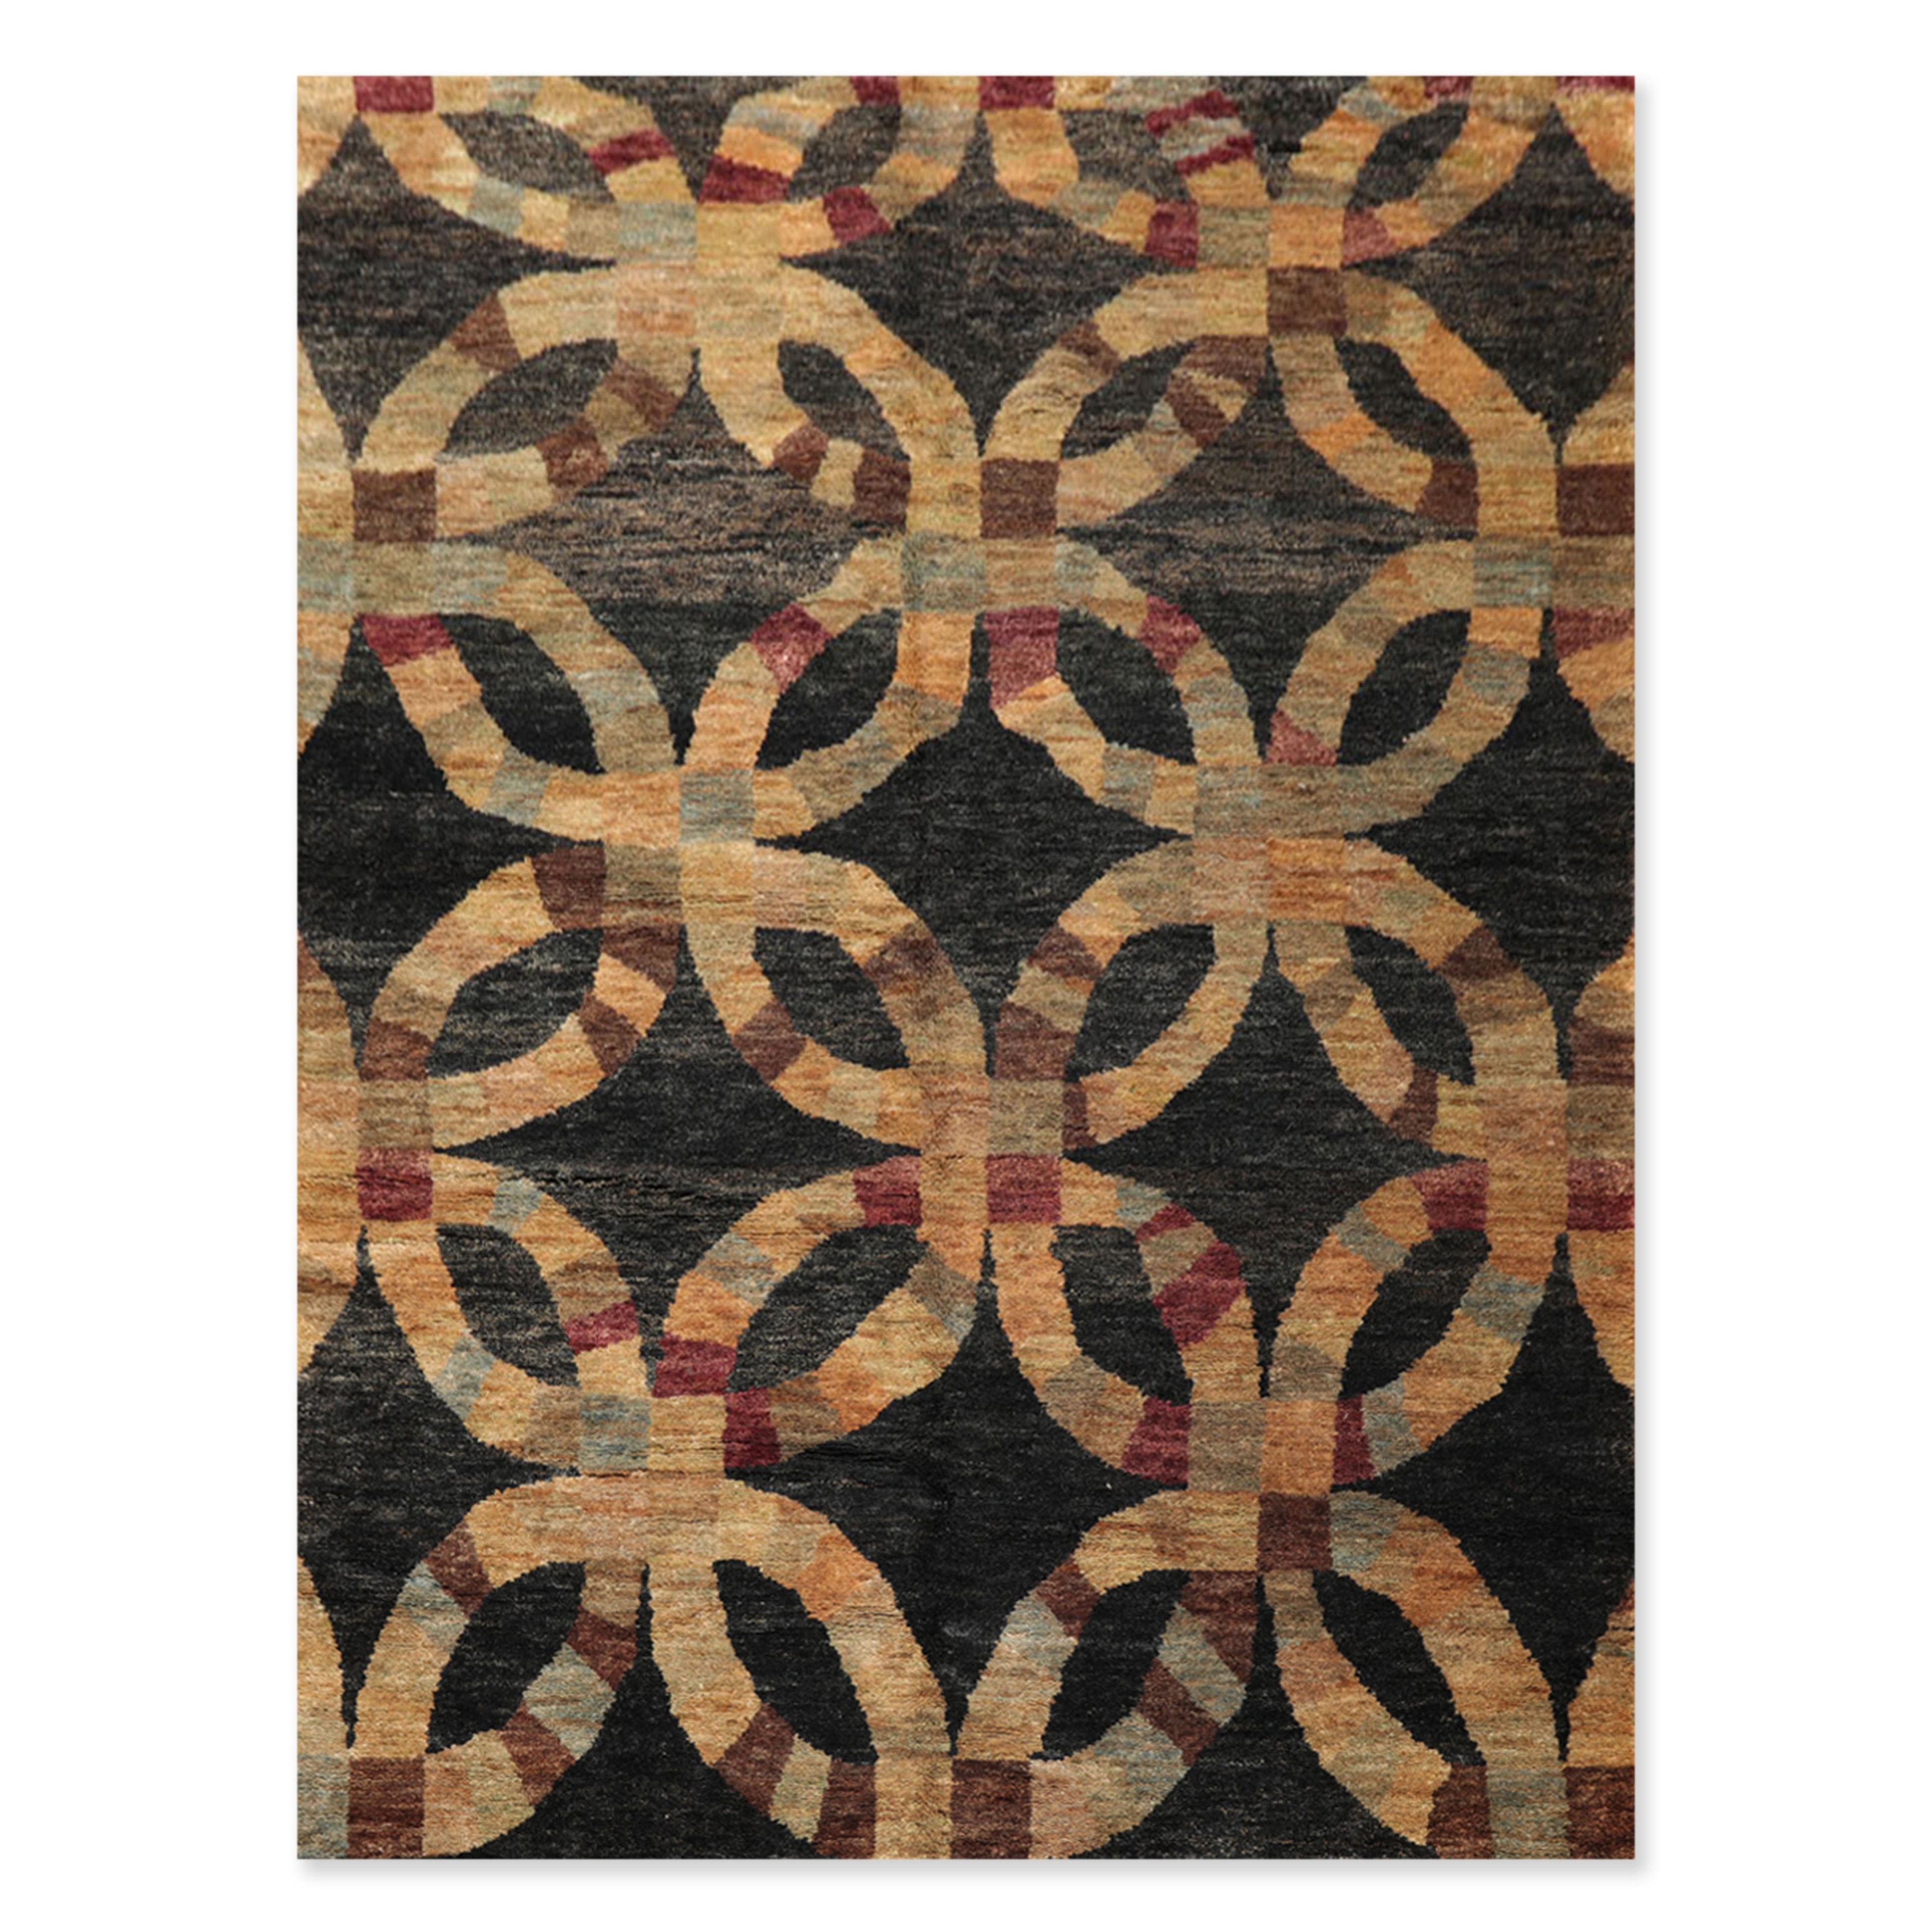 Bedroom Rare War Bordered Brown Rug 6'8 x 9'7 eCarpet Gallery Large Area Rug for Living Room Hand-Knotted Wool Rug 290213 